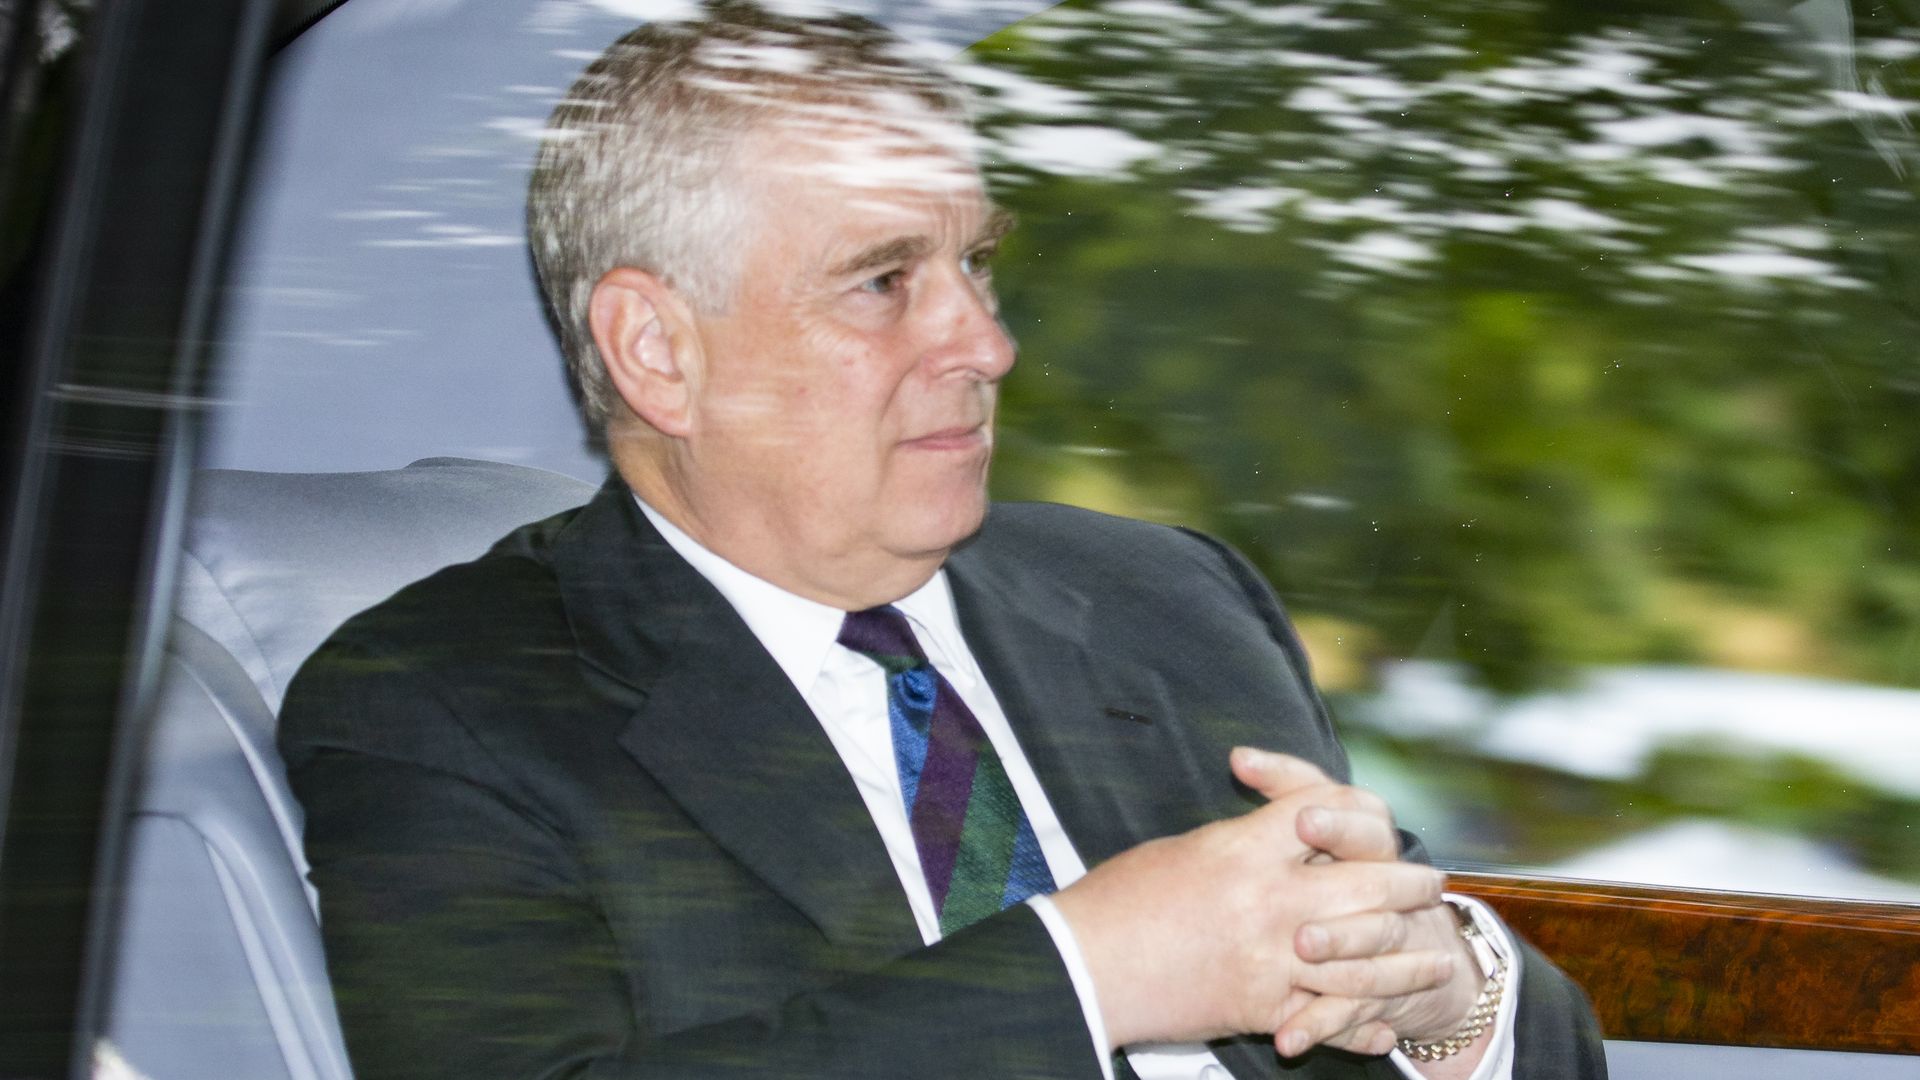 Prince Andrew in a car in Crathie, Aberdeenshire, in August 2019.